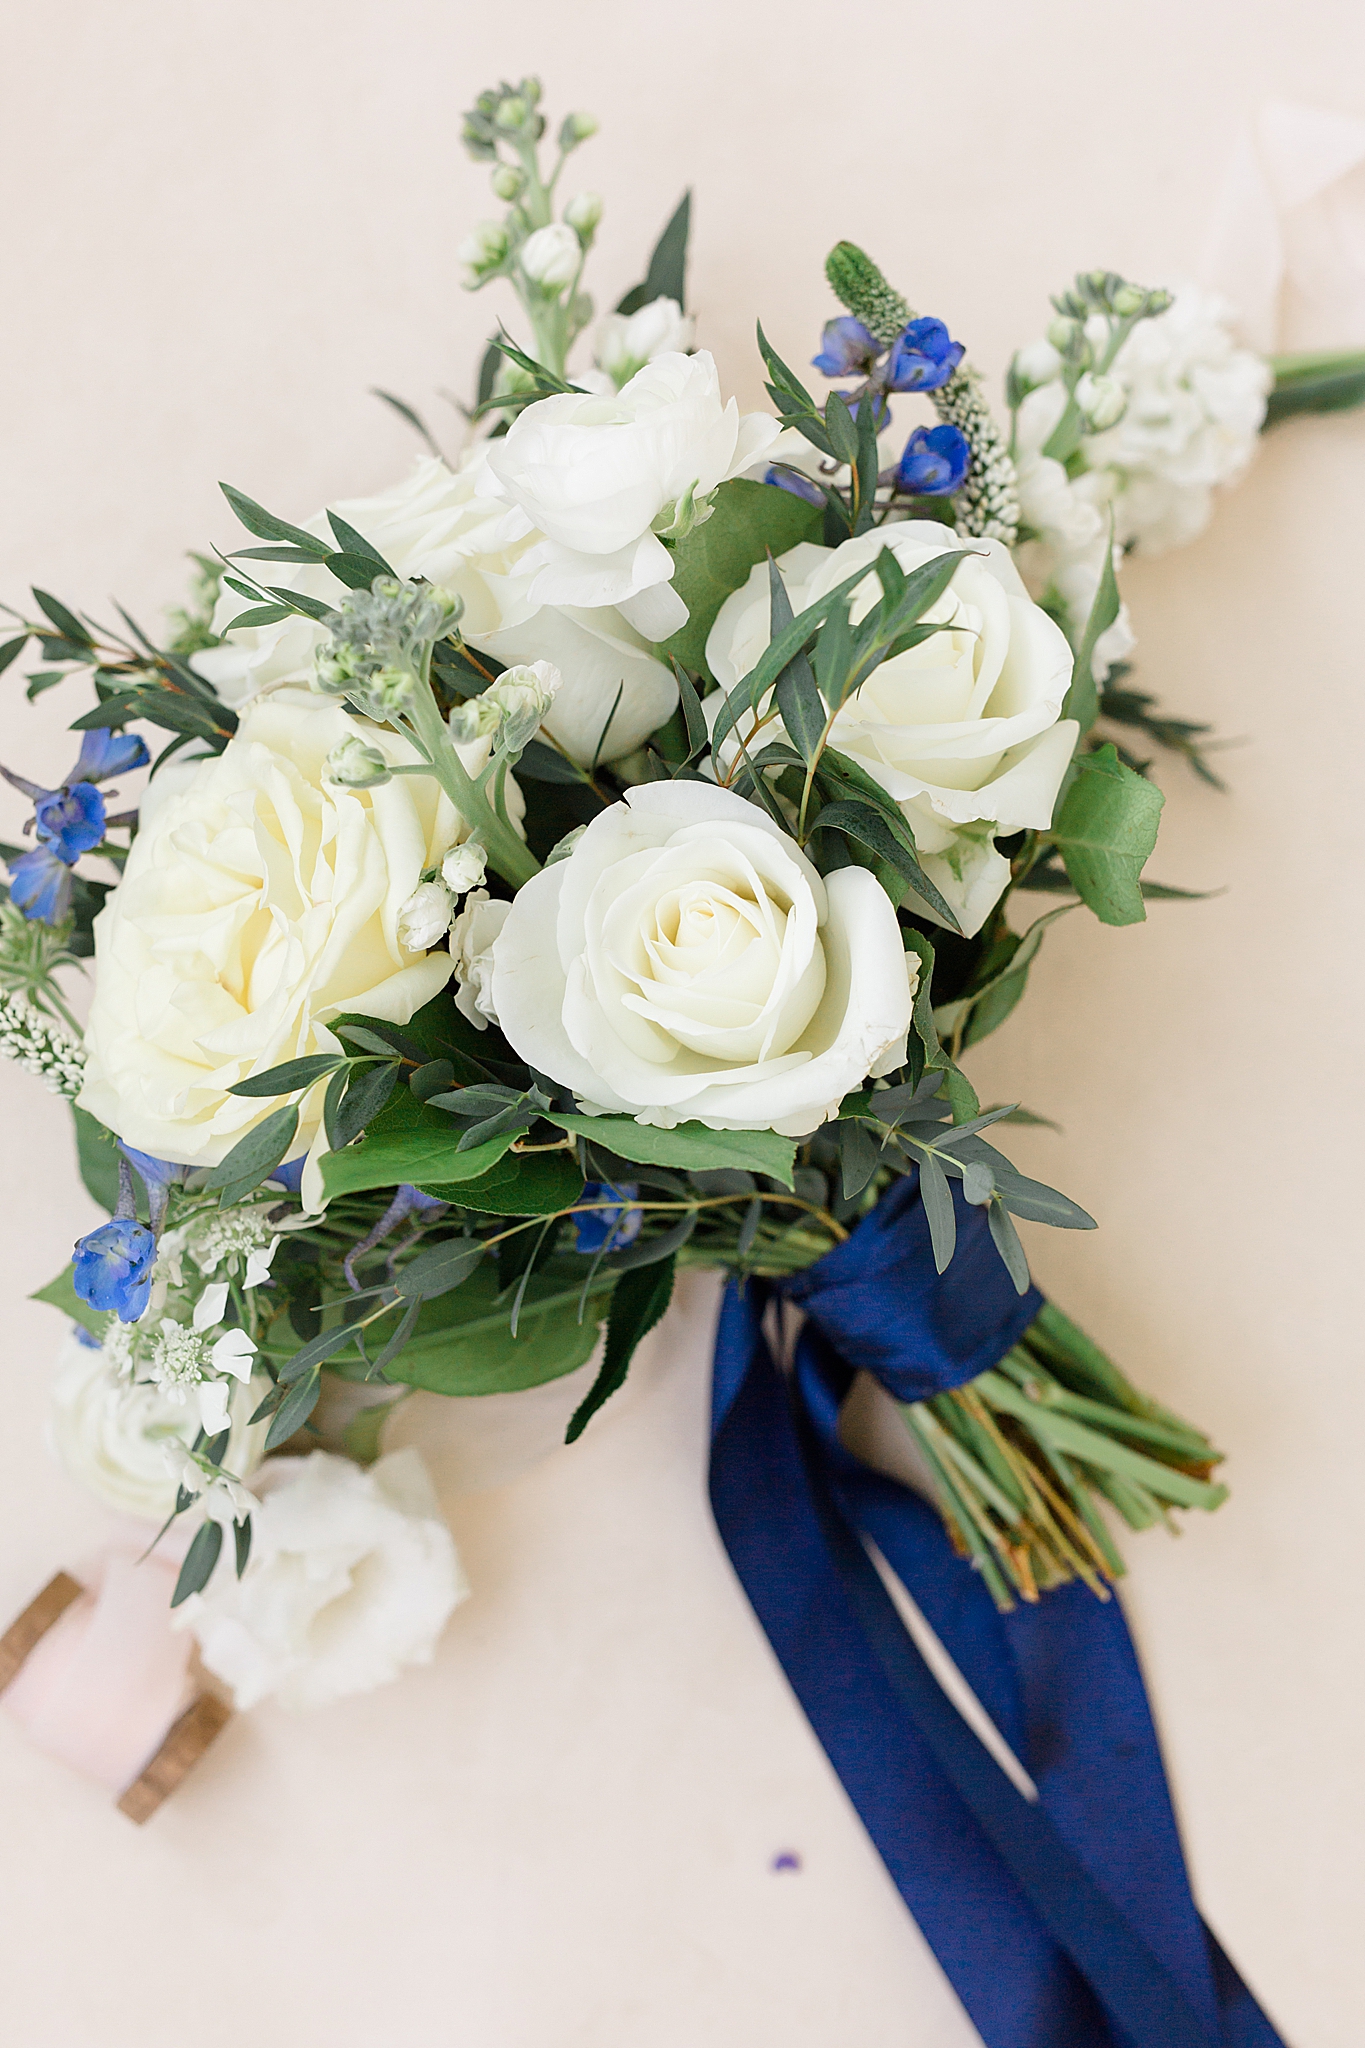 wedding bouquet for summer wedding with white roses and bluebells